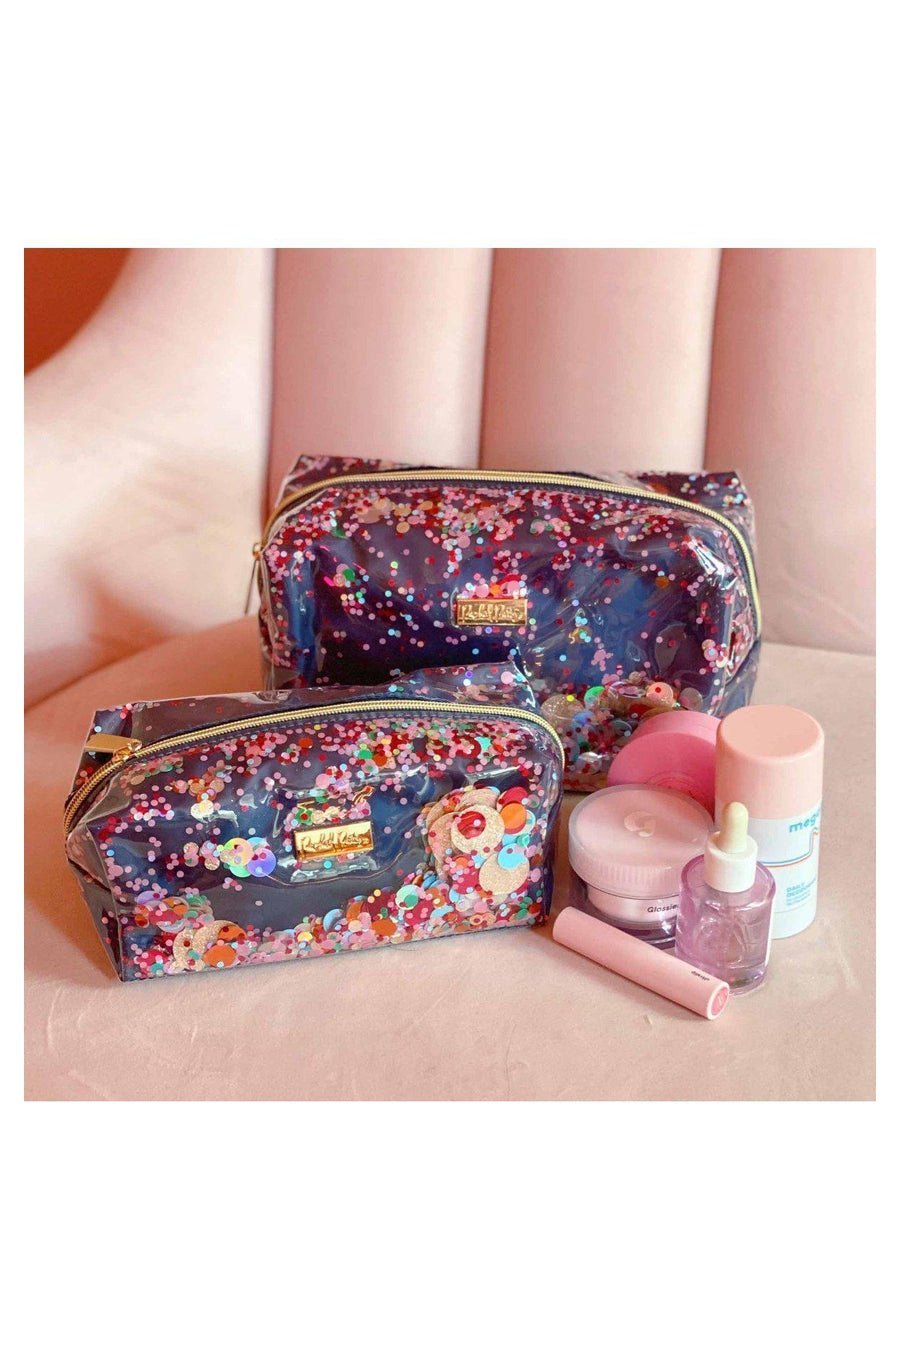 Shop Packed Party The Essentials Vanity Bag - Premium Cosmetic Case from Packed Party Online now at Spoiled Brat 